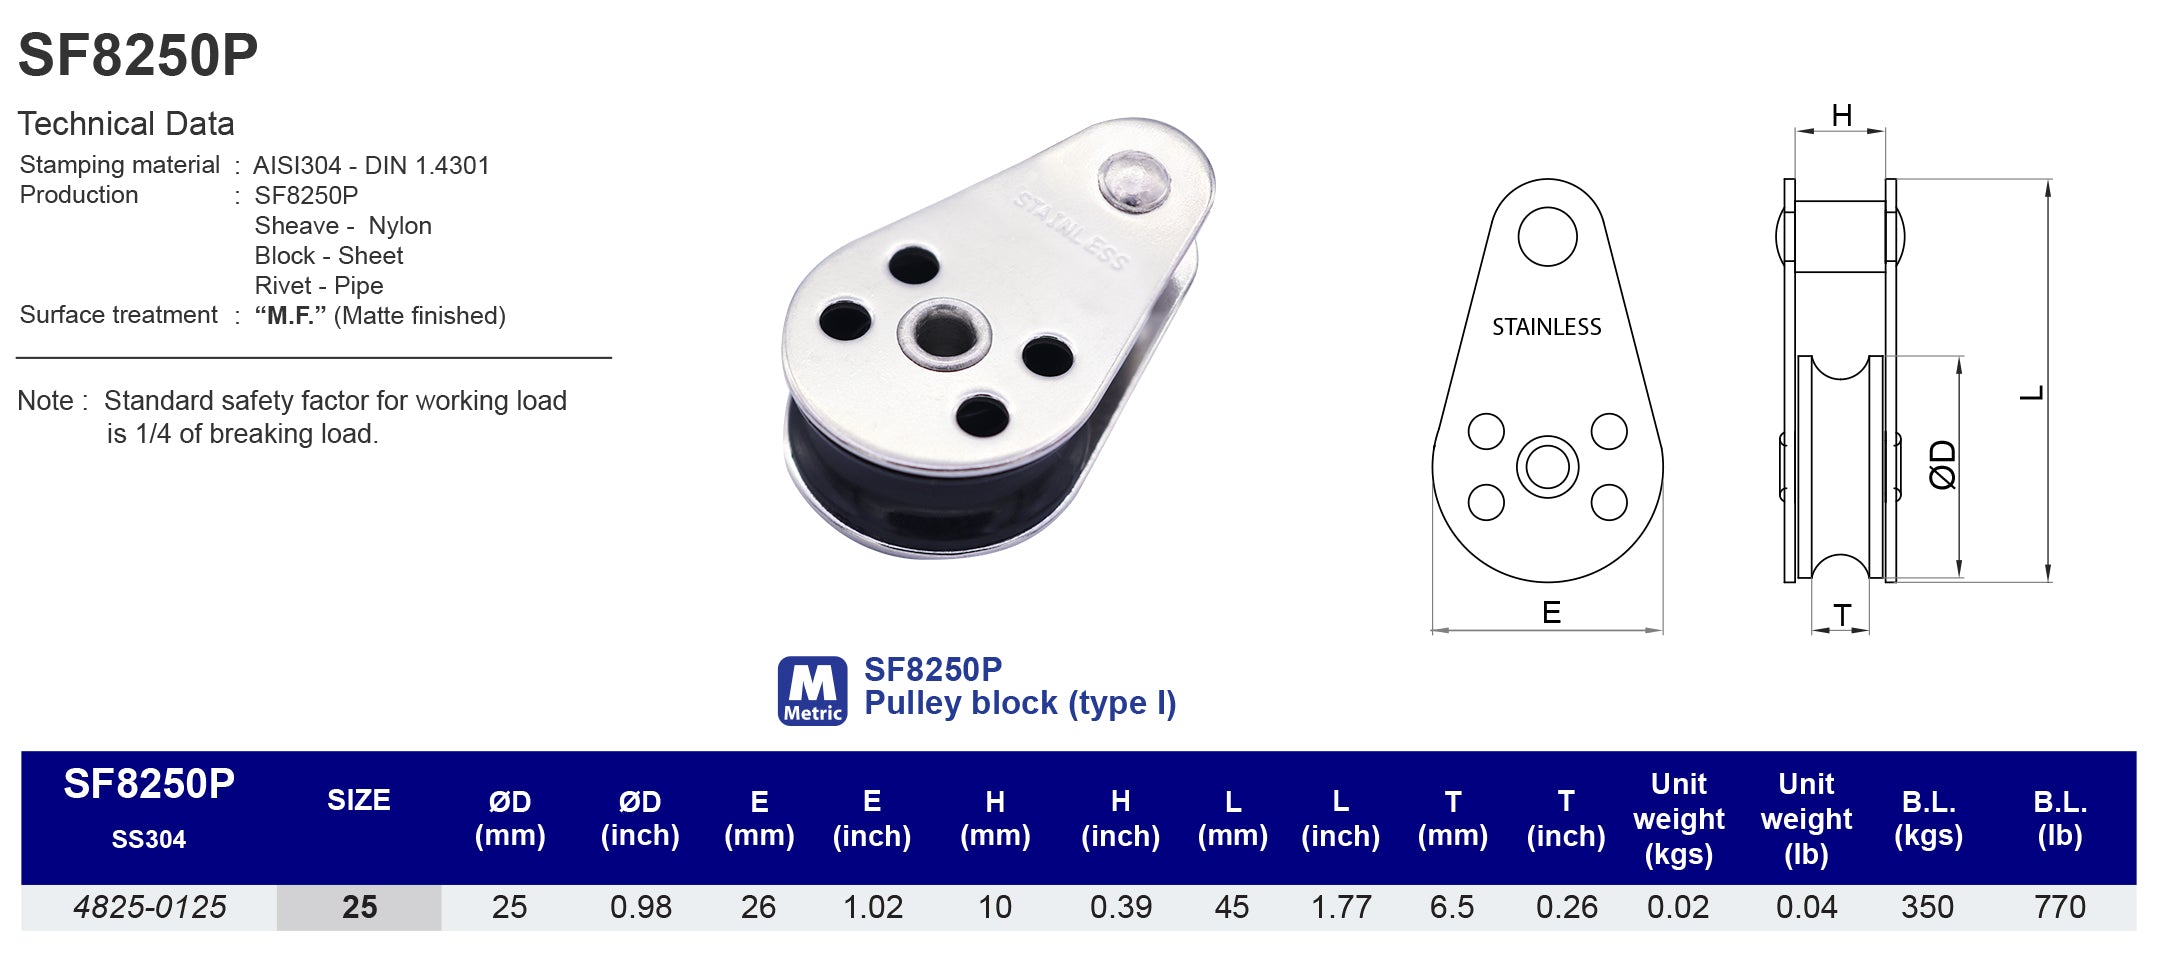 SF8250P Pulley block (type I) - 304